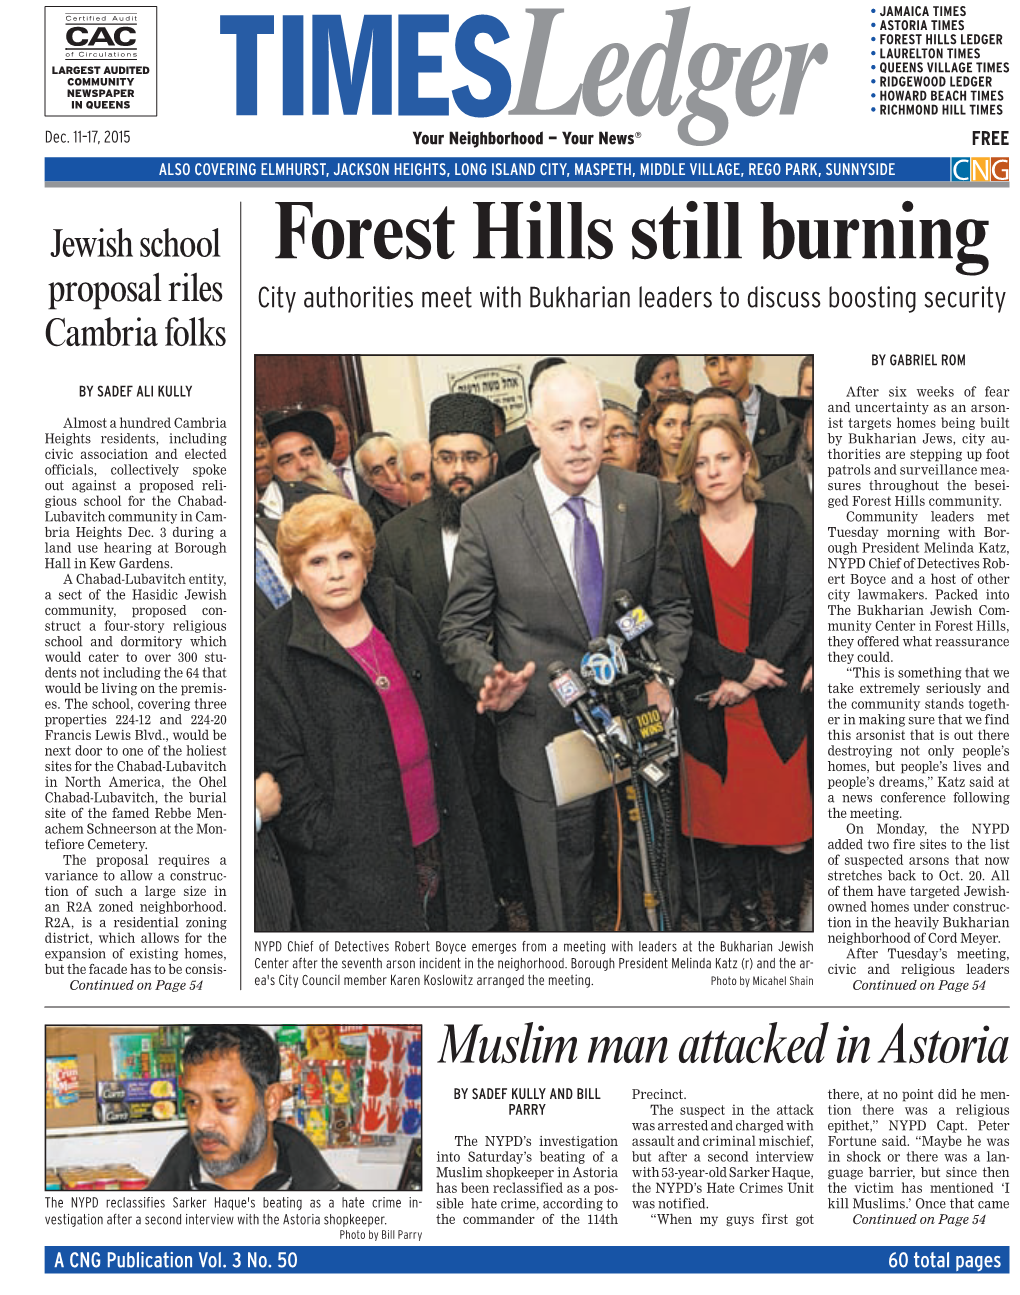 Forest Hills Still Burning Proposal Riles City Authorities Meet with Bukharian Leaders to Discuss Boosting Security Cambria Folks by GABRIEL ROM